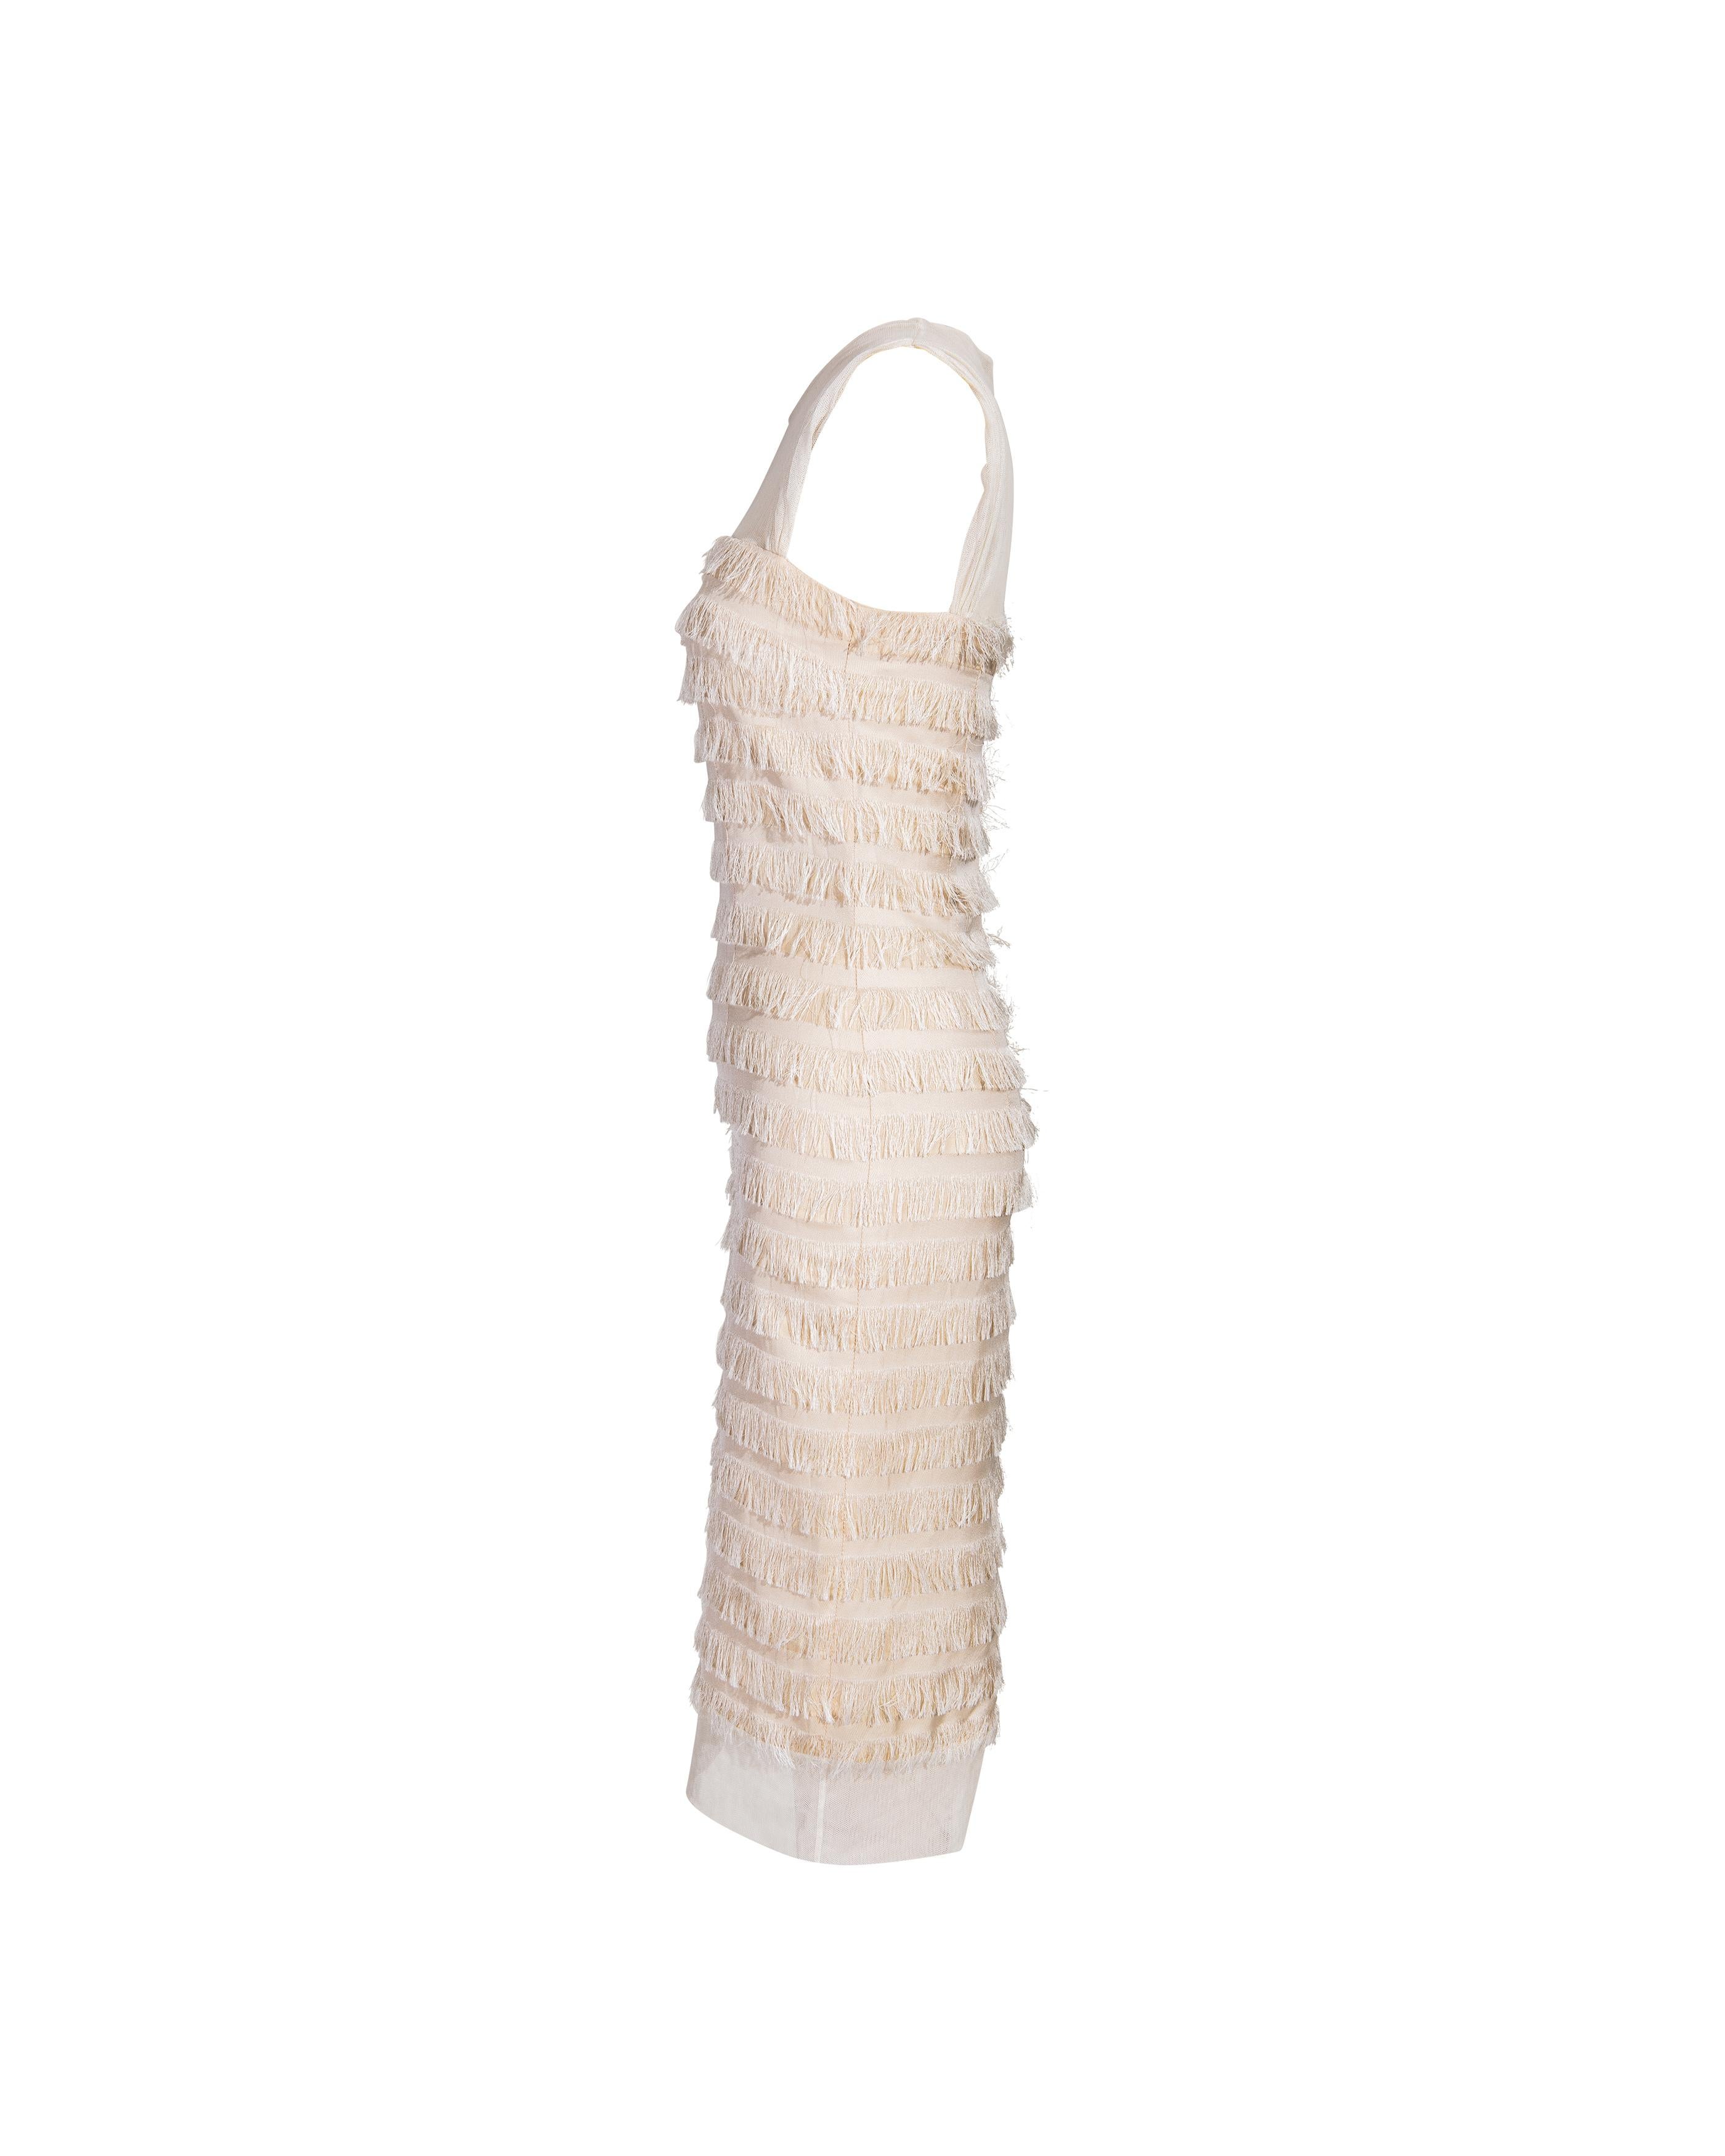 S/S 2006 Balenciaga by Nicolas Ghesquiere  Ecru Mesh Fringe Dress In Excellent Condition For Sale In North Hollywood, CA